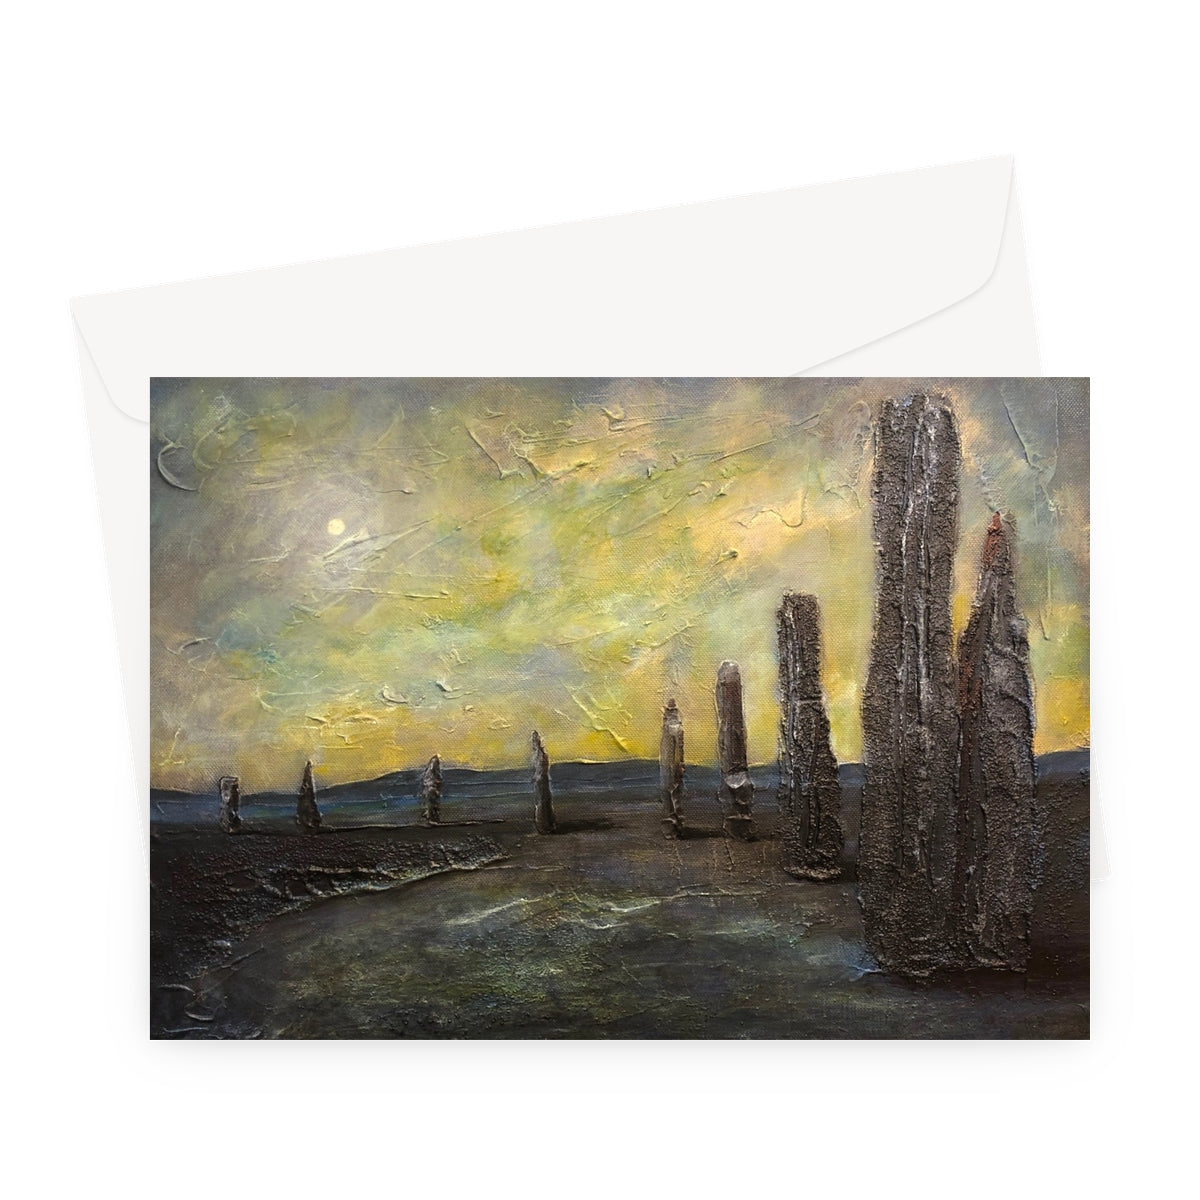 An Ethereal Ring Of Brodgar Art Gifts Greeting Card-Greetings Cards-Orkney Art Gallery-A5 Landscape-10 Cards-Paintings, Prints, Homeware, Art Gifts From Scotland By Scottish Artist Kevin Hunter